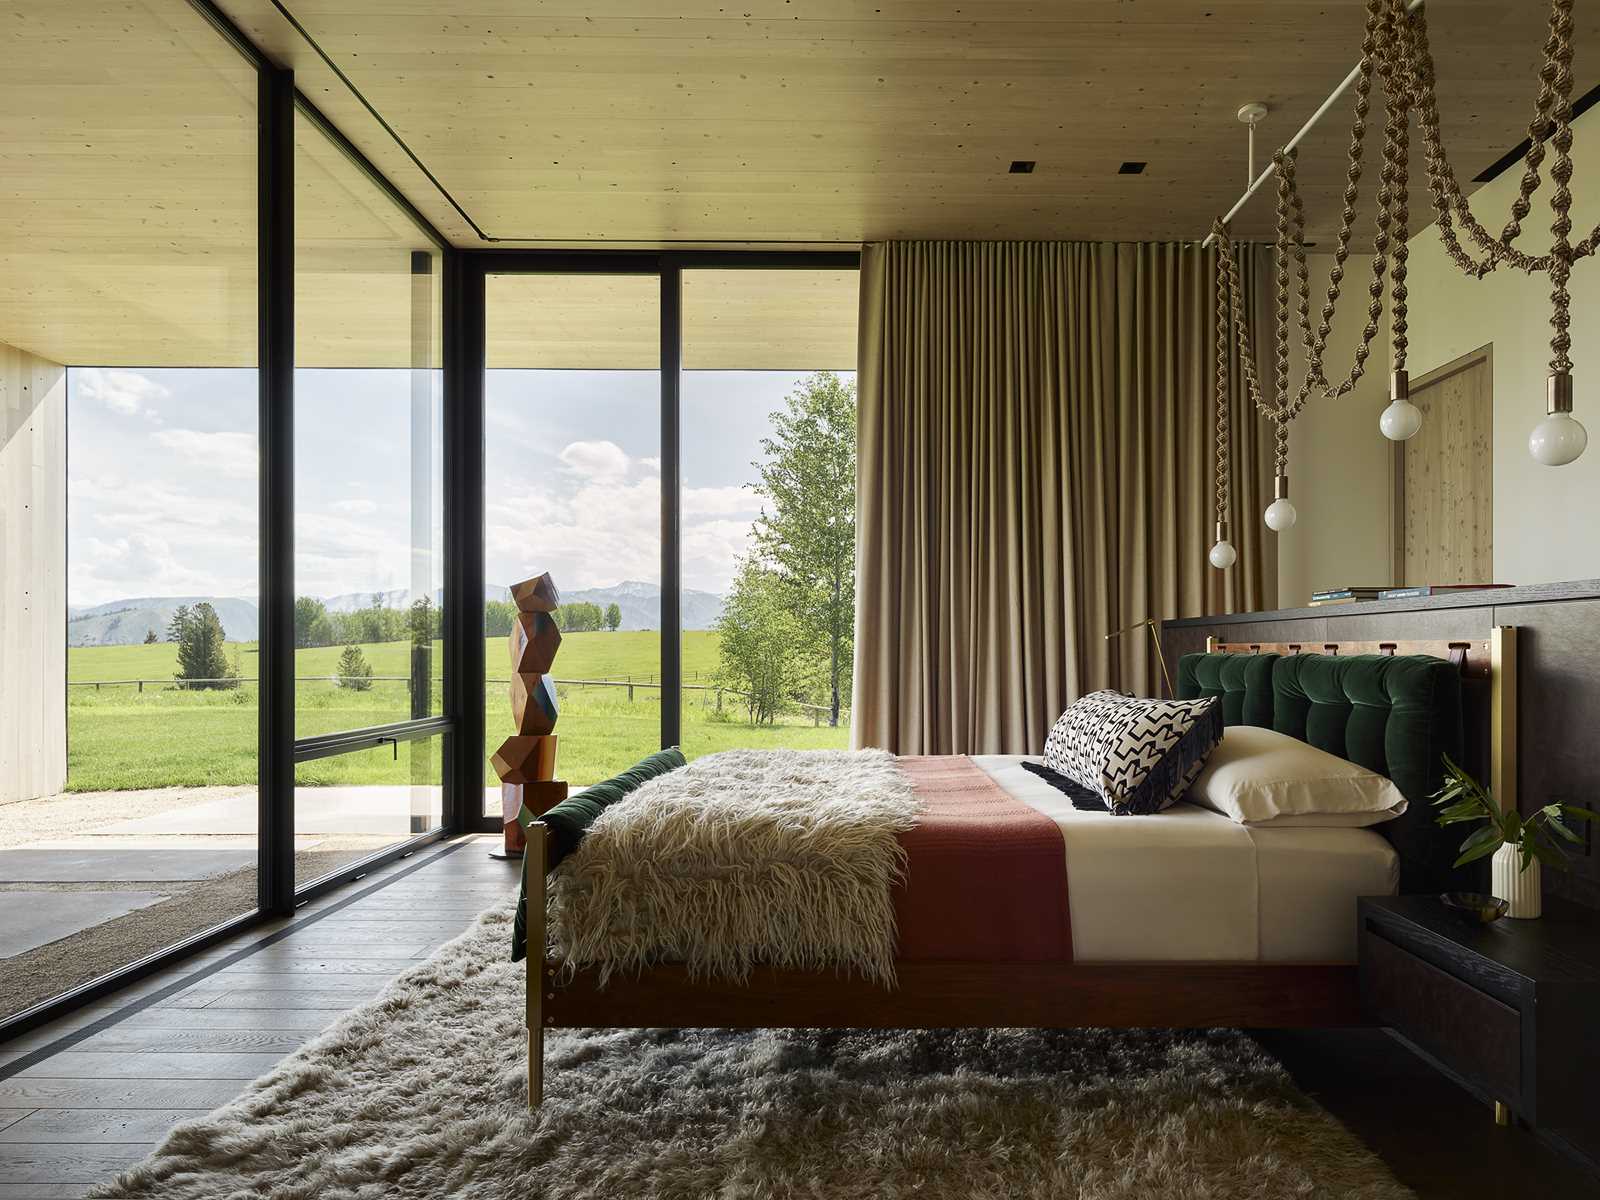 A modern bedroom with floor-to-ceiling windows and a wood ceiling.